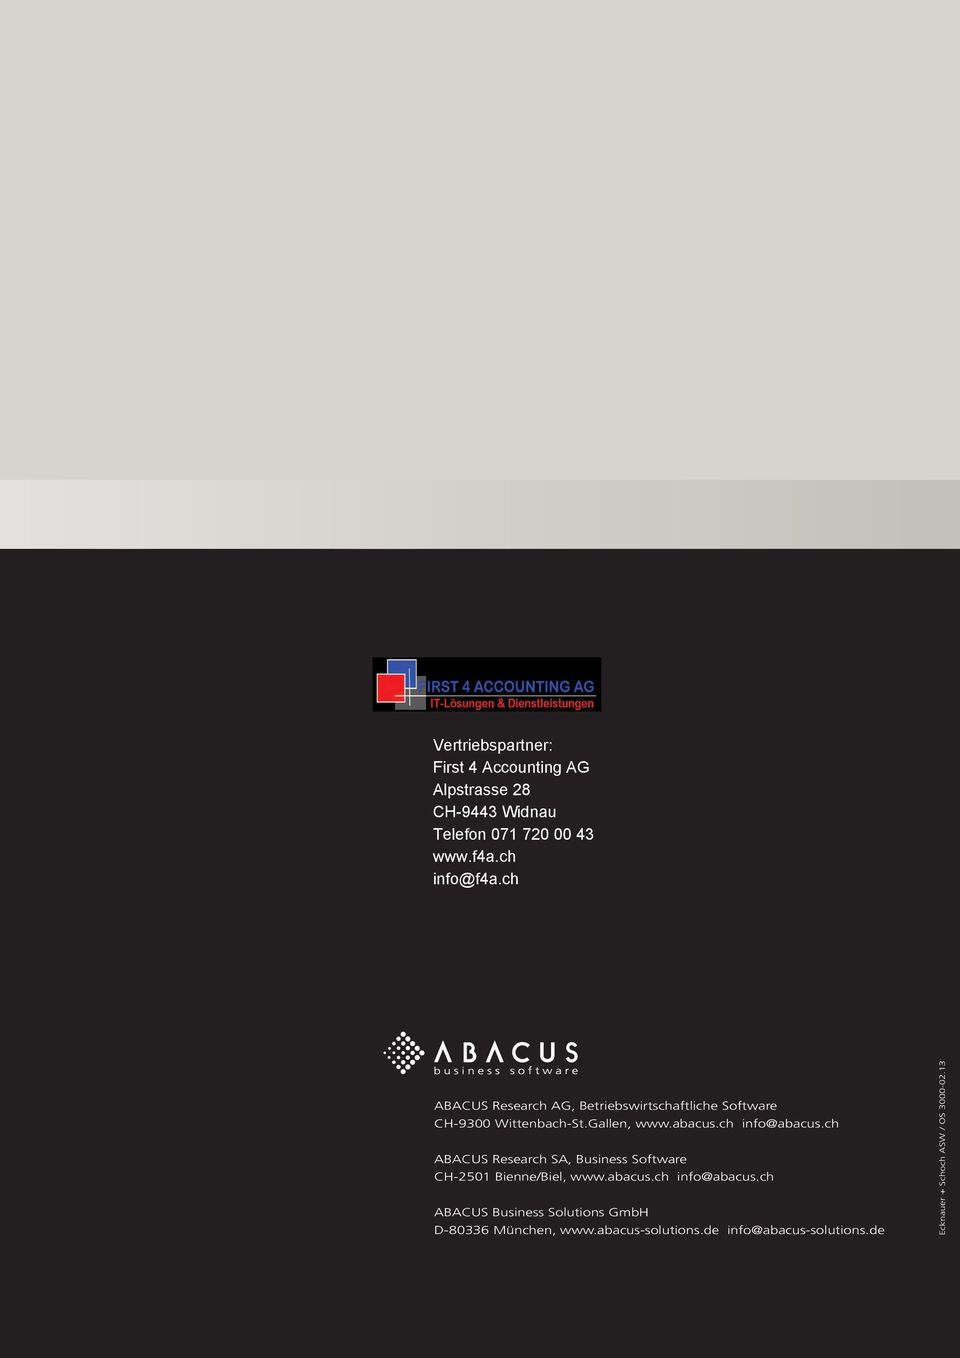 ch ABACUS Research SA, Business Software CH-2501 Bienne/Biel, www.abacus.ch info@abacus.